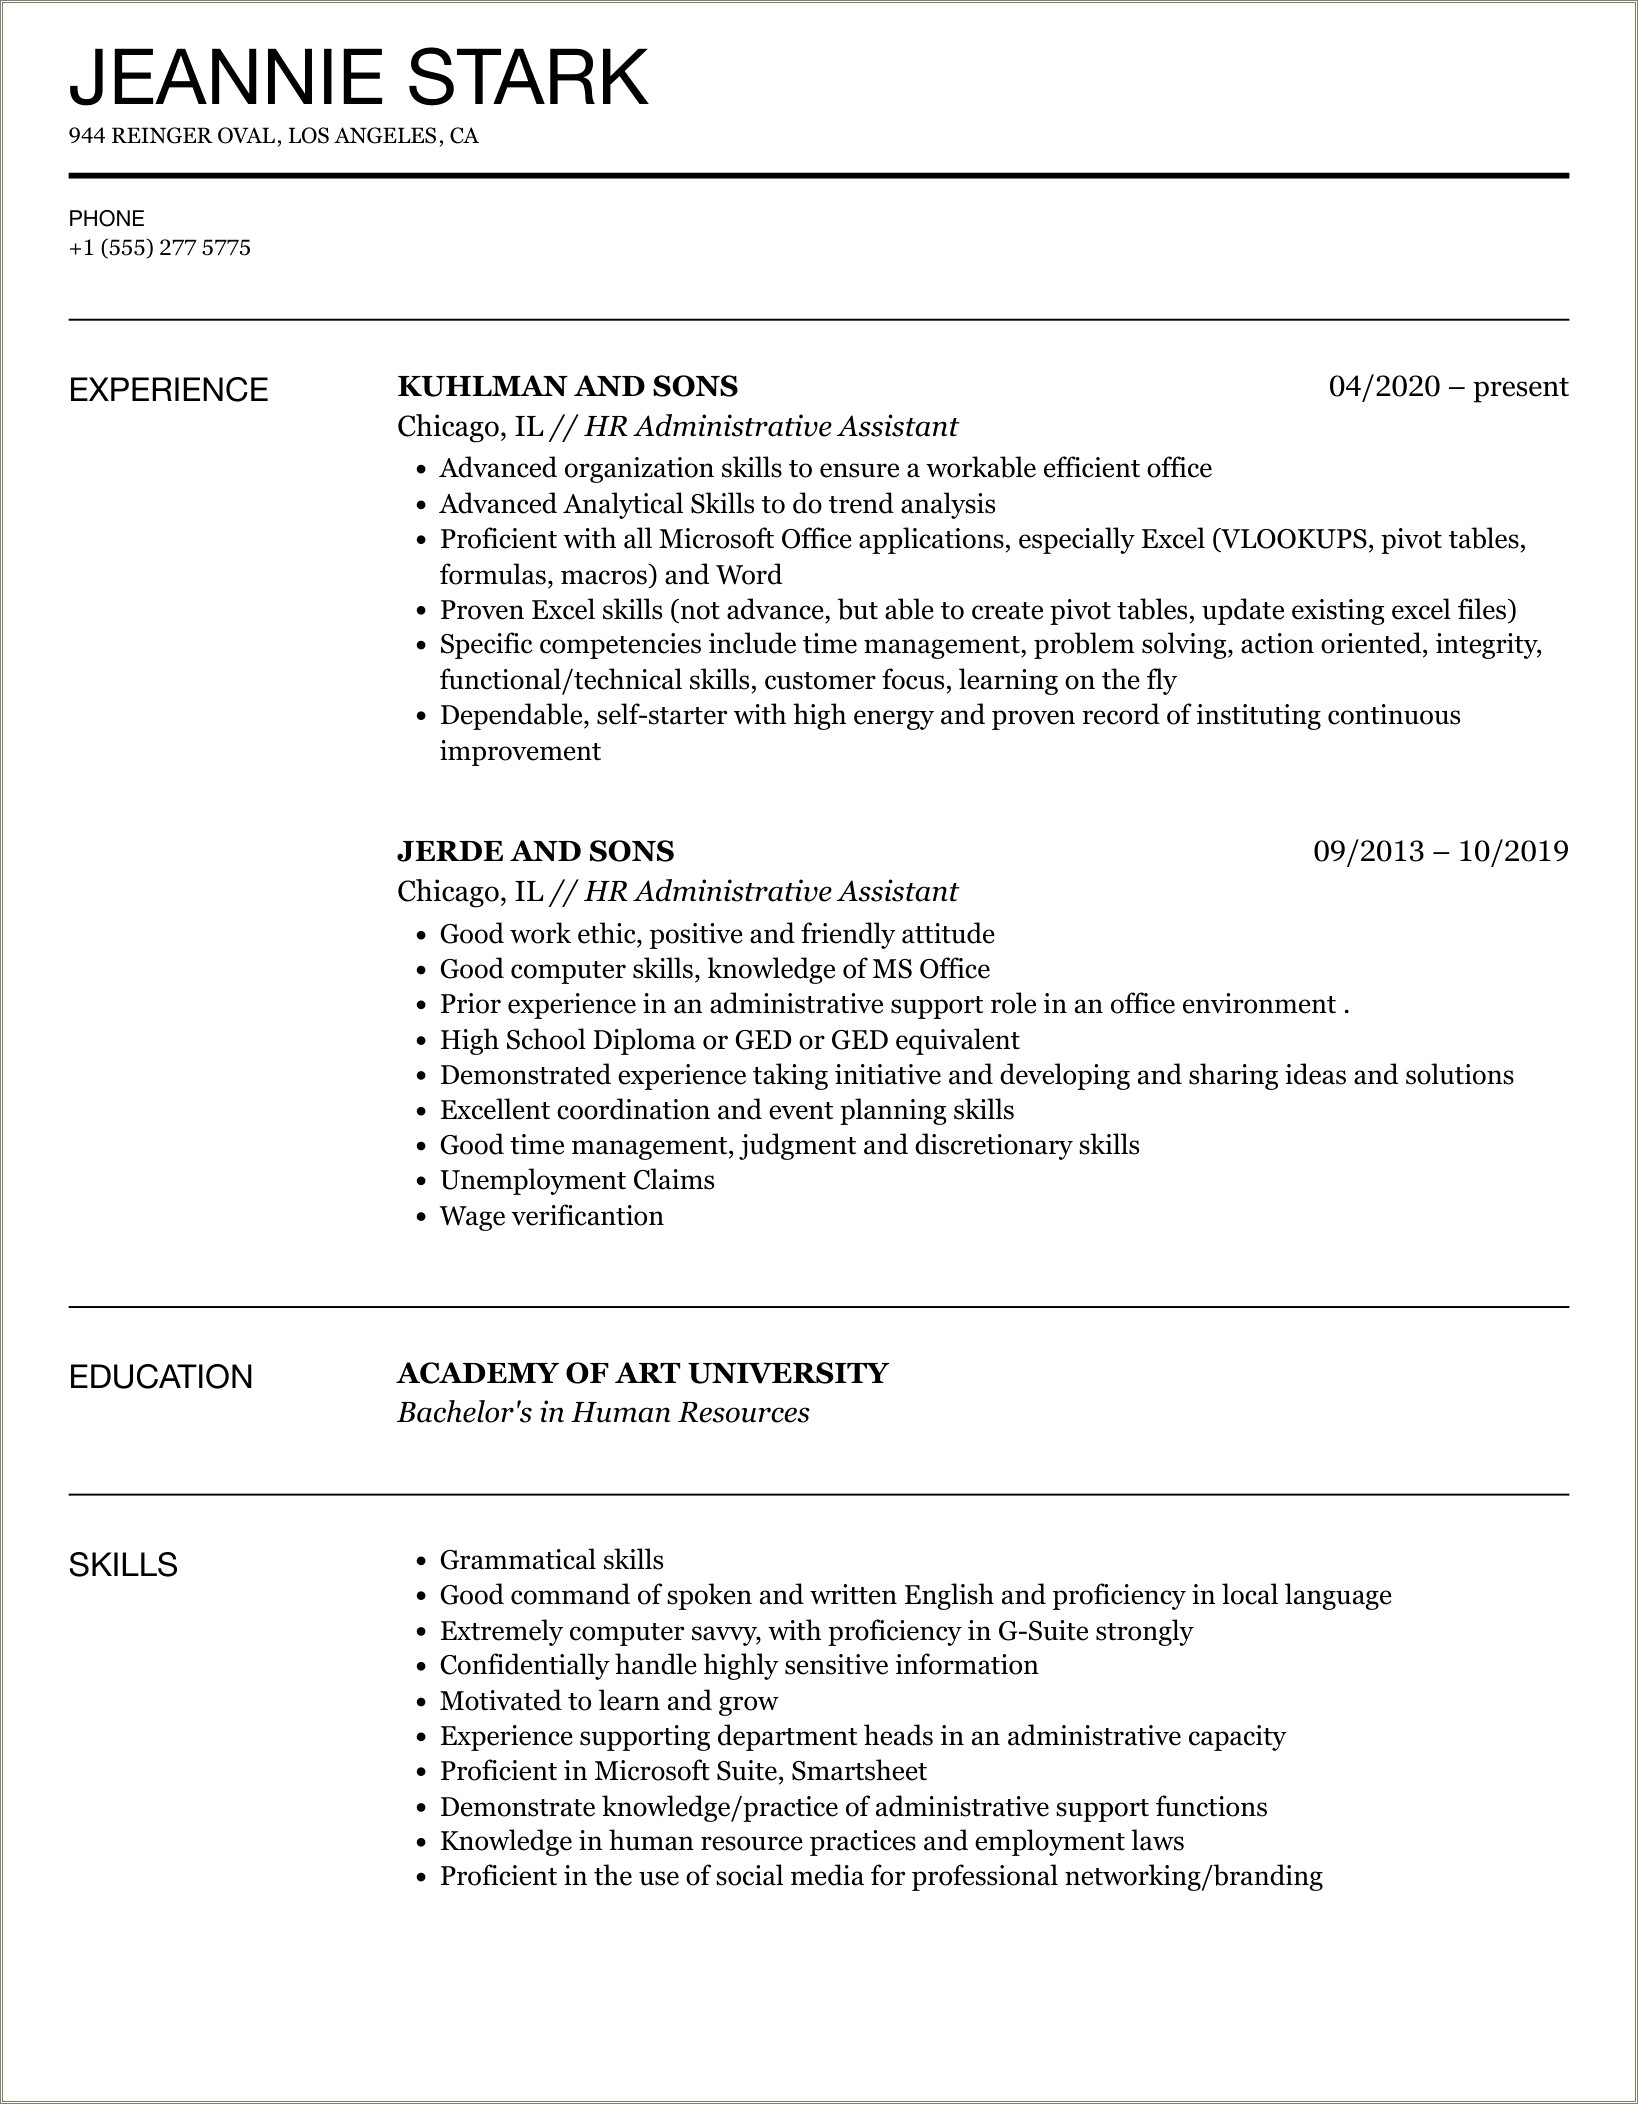 Sample Resume For An Administrative Assistant Entry Level